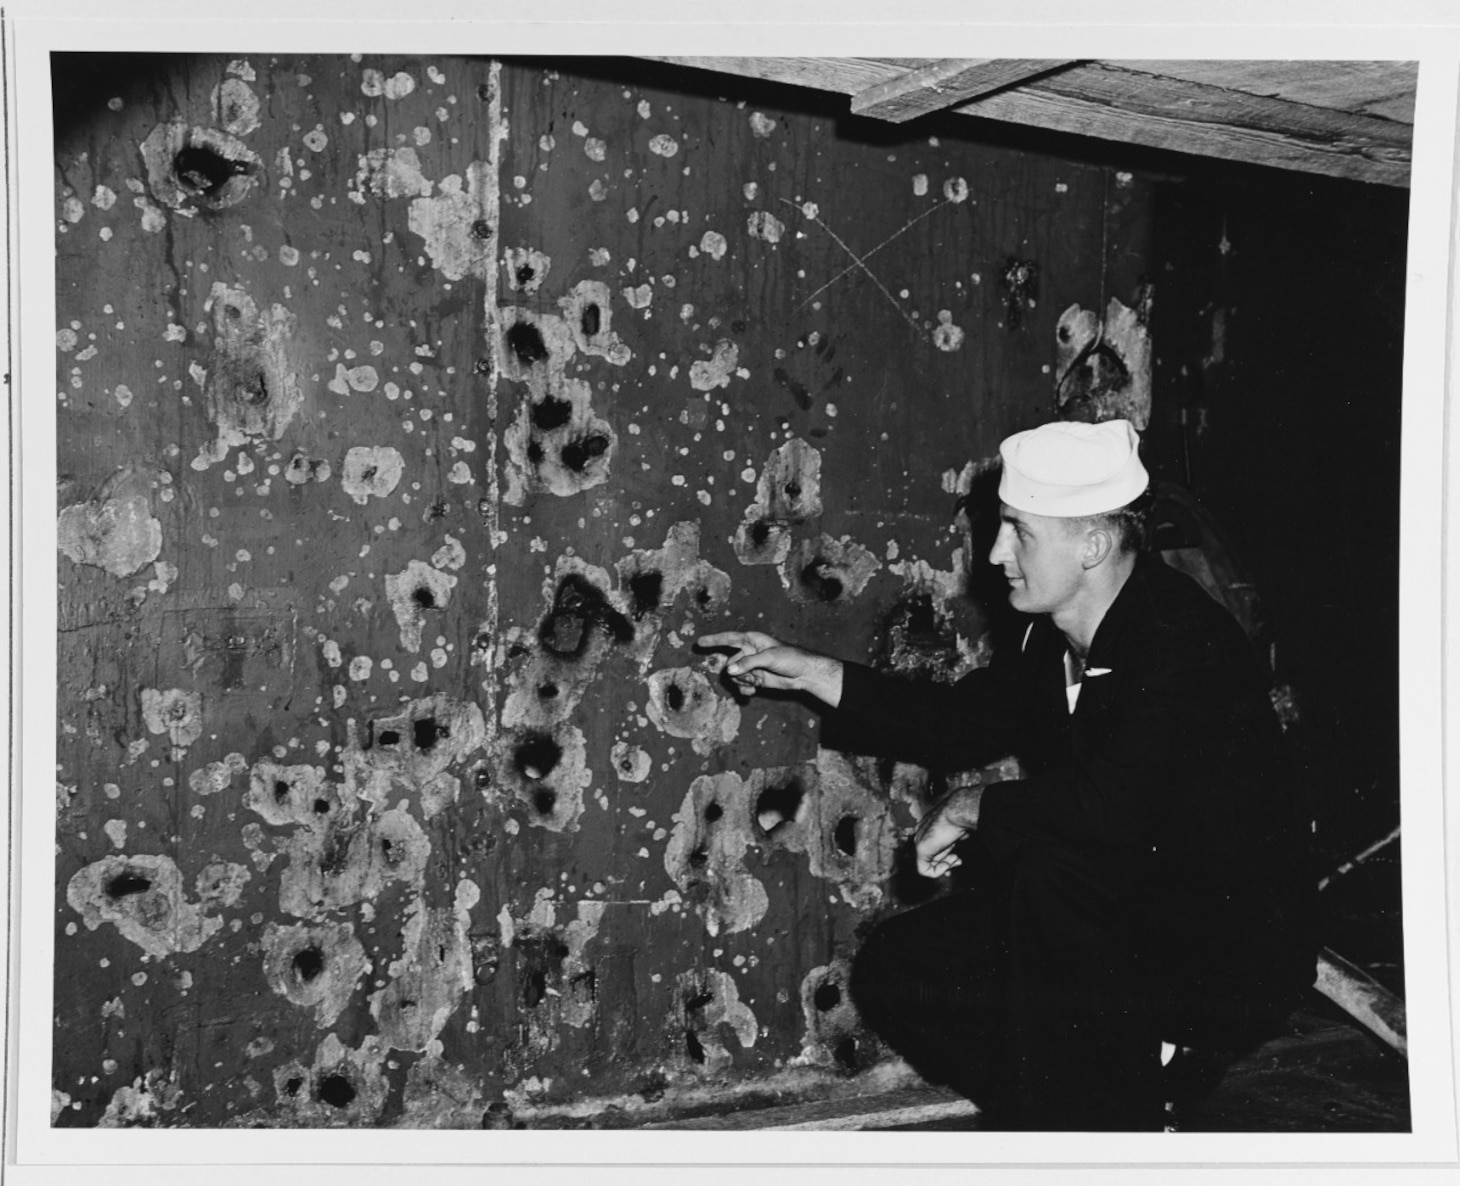 Seaman First Class Charles Olinger points out shell fragment damage to the ventilation trunk at the front of the superstructure, just above the main deck. Photographed at the Philadelphia Navy Yard in November 1942. This damage was received during the Battle of Cape Esperance, 12 October 1942. It was caused by a shell that struck the face of turret # 3 and detonated on impact. The explosion was about thirty feet away from the damage seen here. Official U.S. Navy Photograph, now in the collections of the National Archives. (NHHC 80-G-36296)